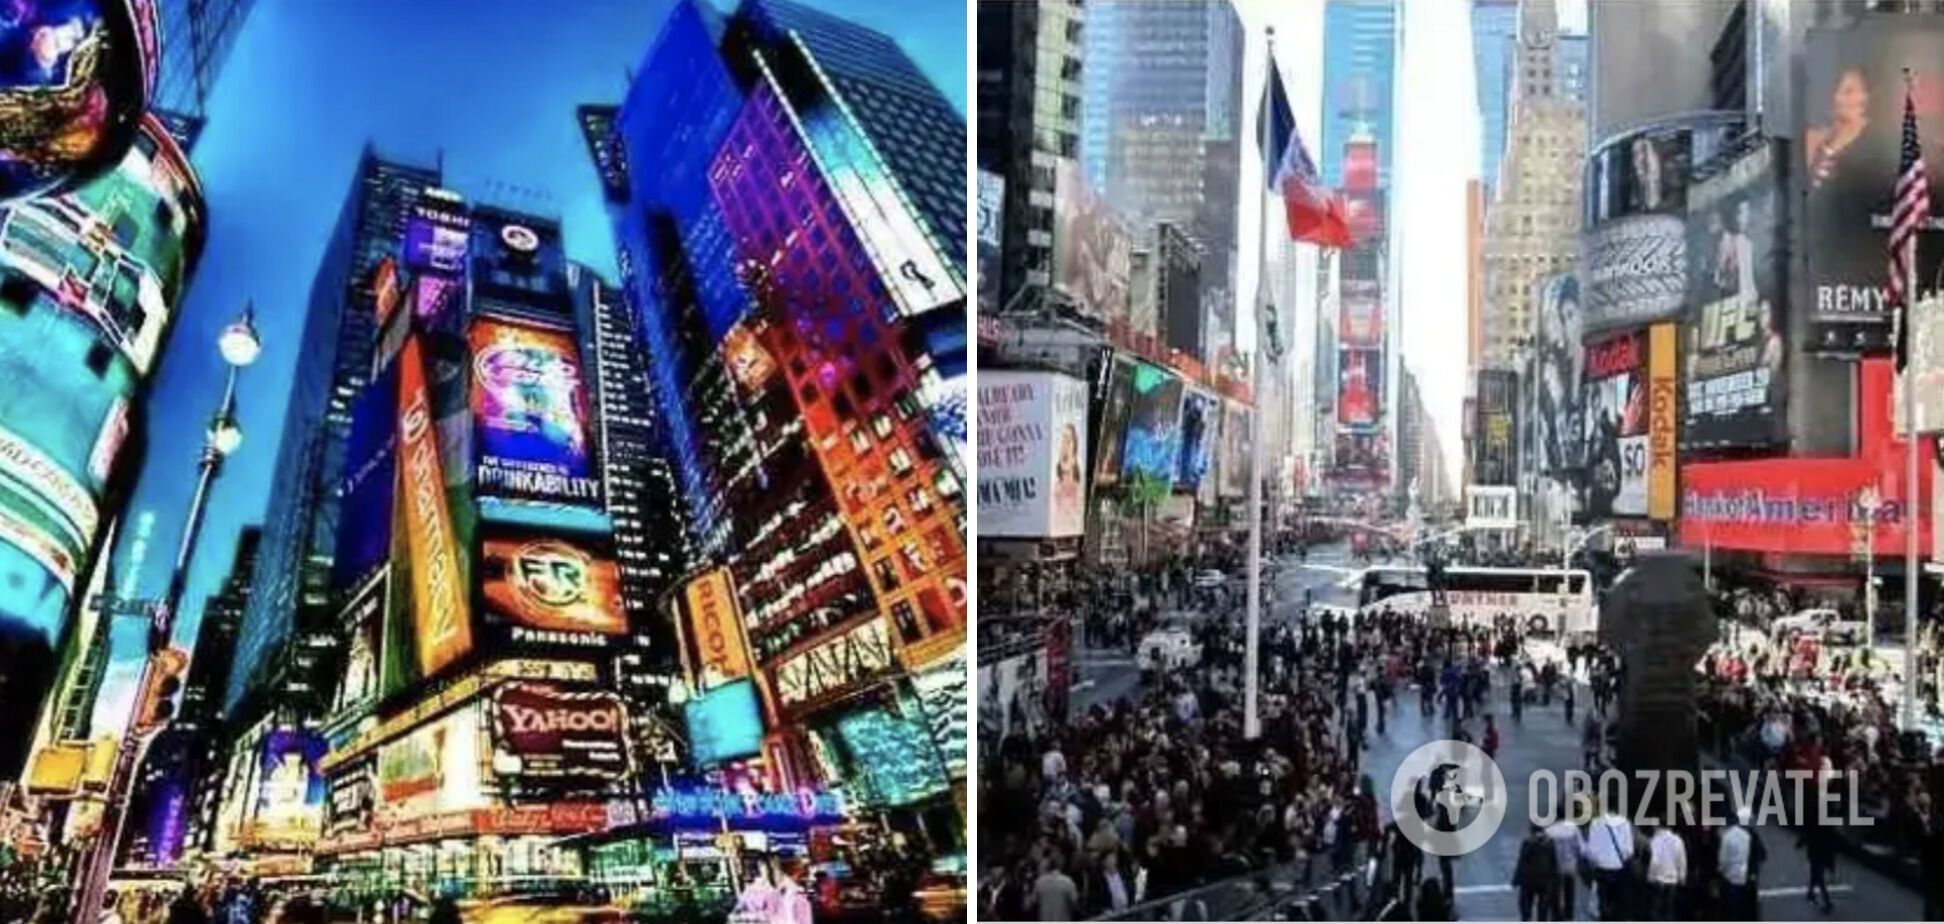 Times Square in New York City is visited by millions of tourists